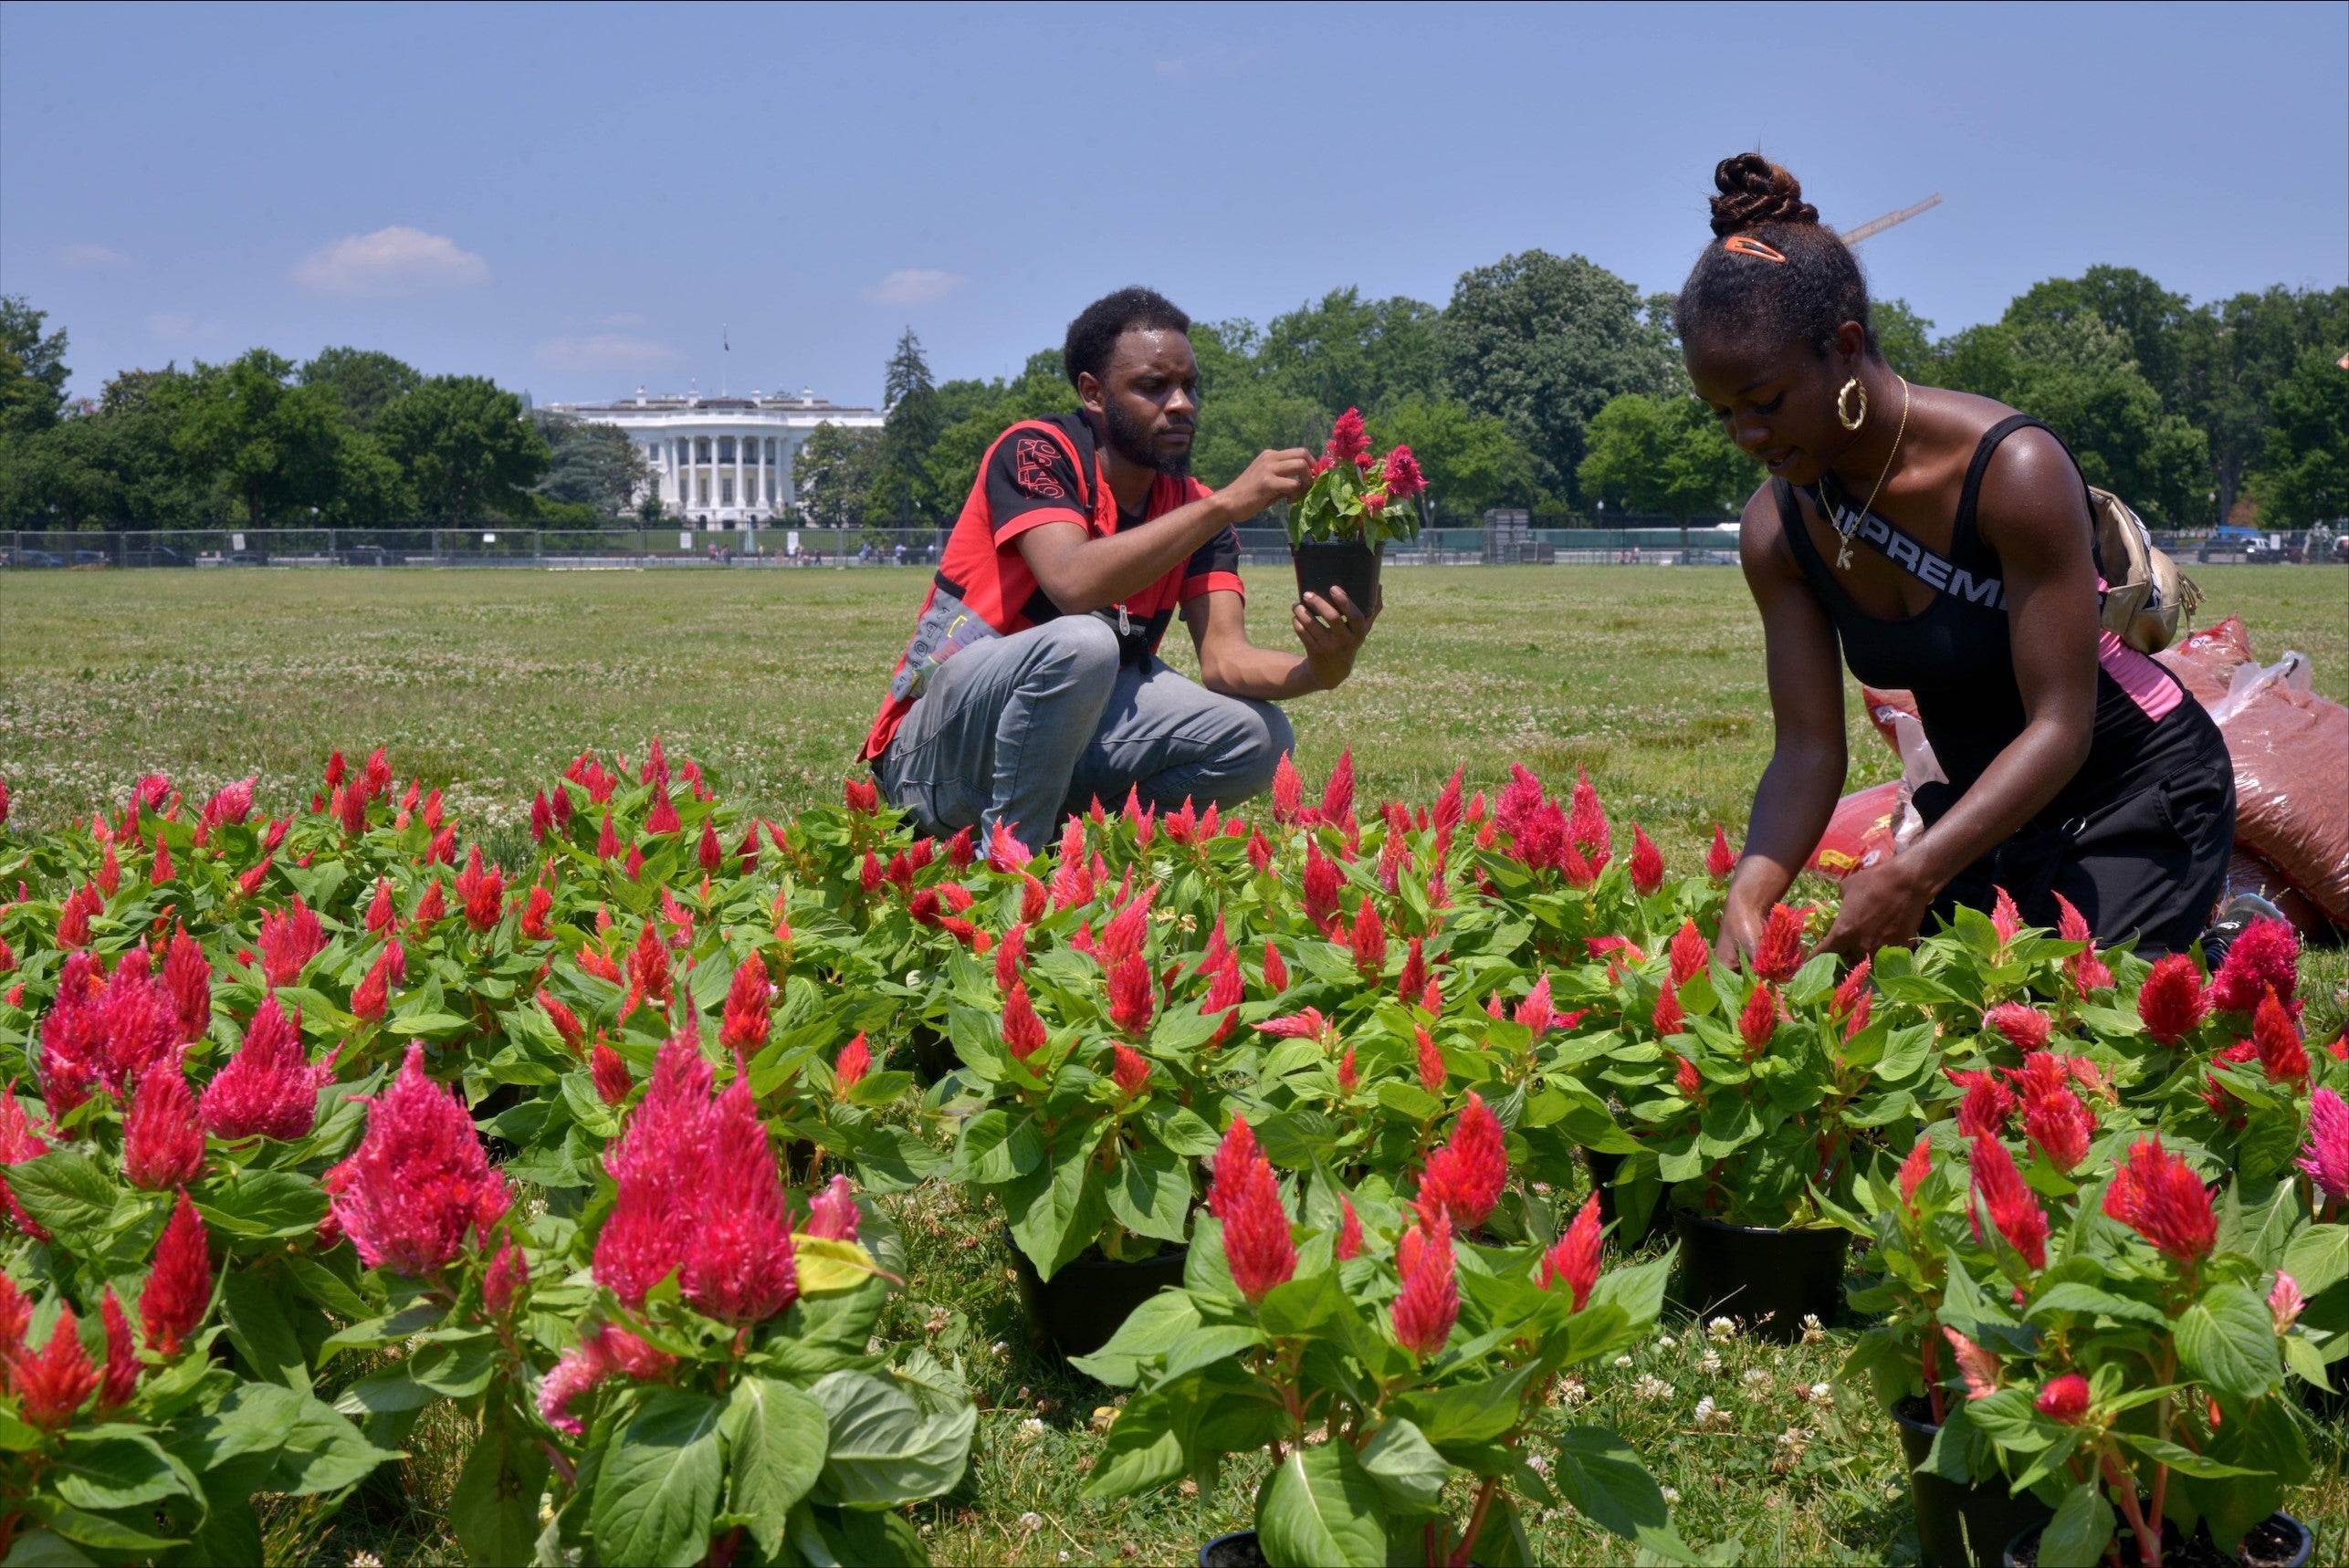 Kehmari Norman, a community garden specialist in DC and owner of Black Flower Market (BLK FLWR MRKT) and a local volunteer tend to a 150-foot garden planted outside the White House to raise awareness for reparations for the legacy of slavery, in Washington, DC. 